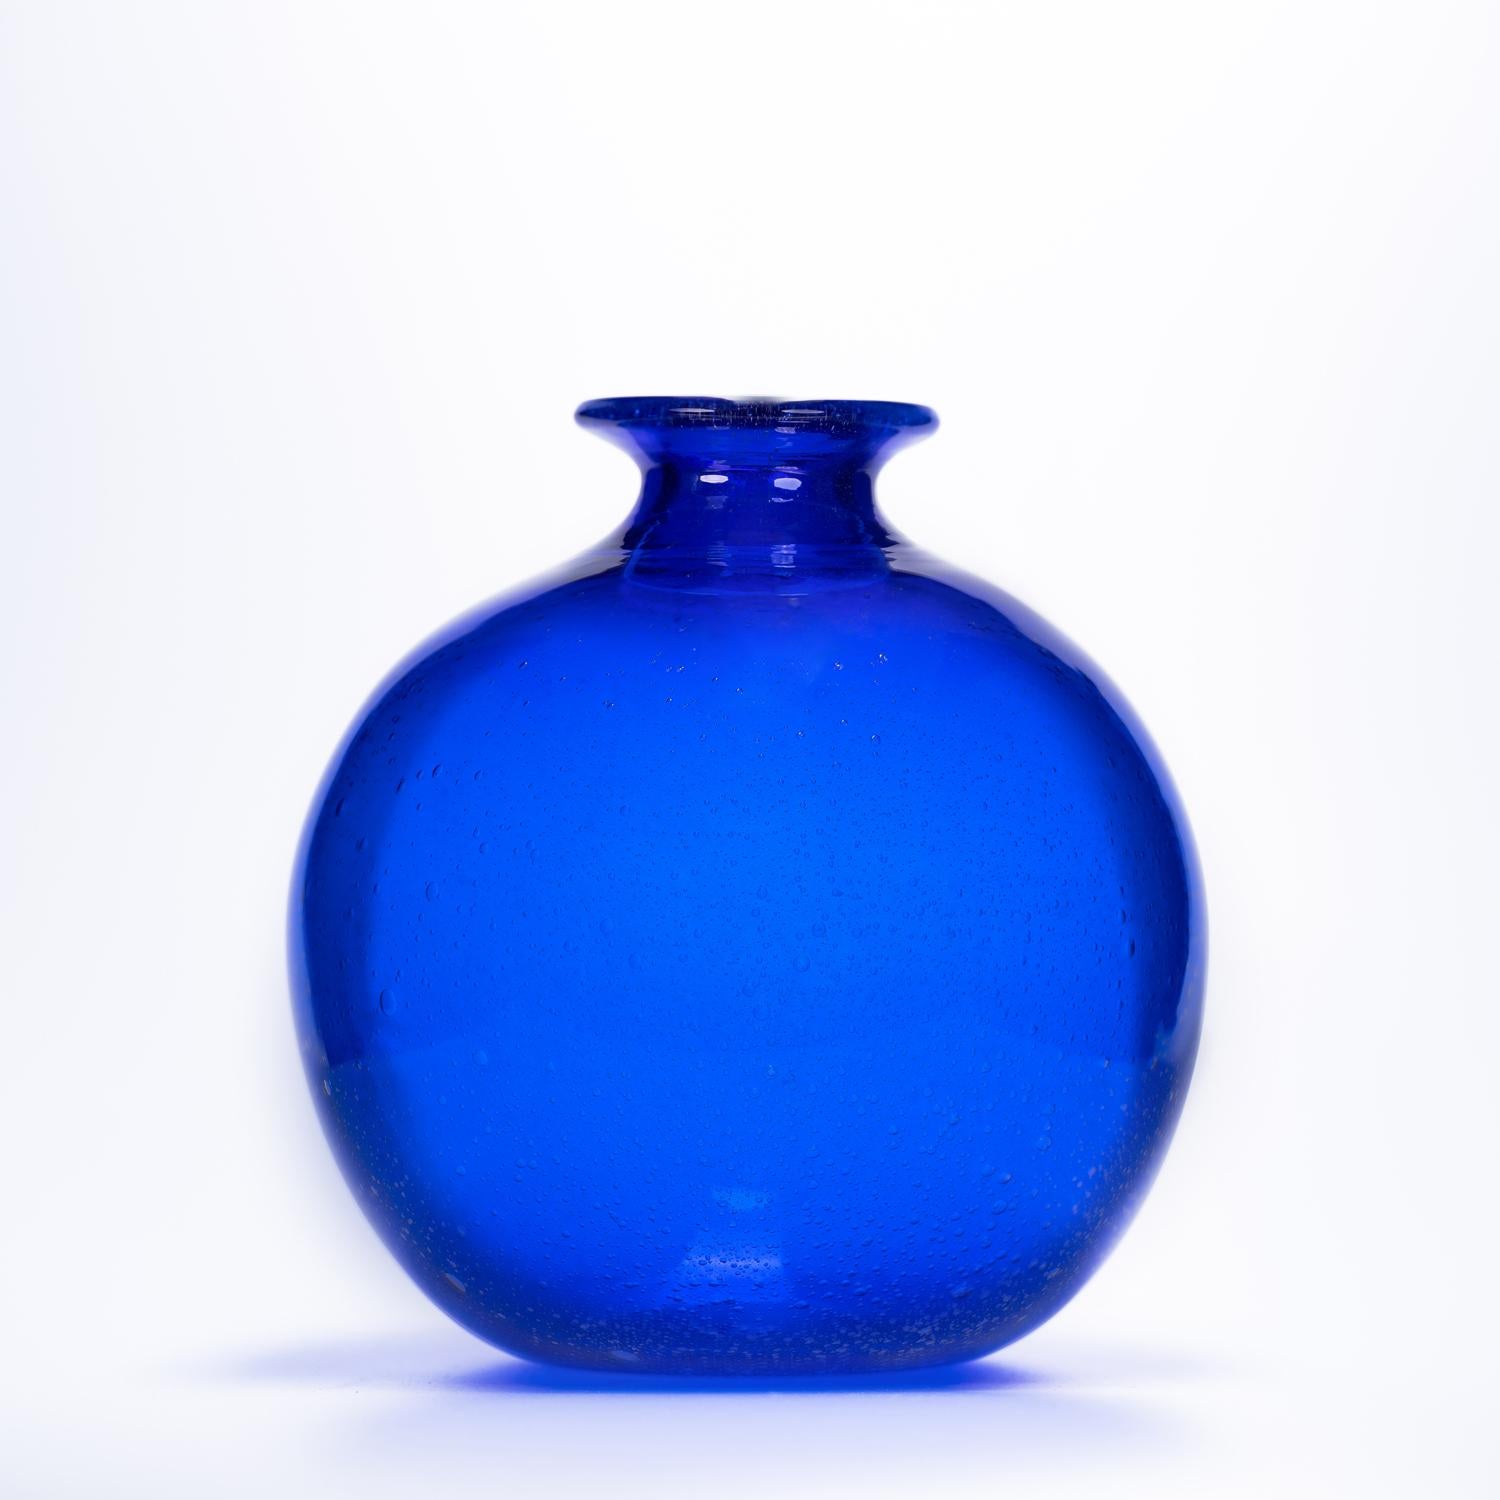 Our aim is the emotion through the creation of 1295 Murano glass artpieces.
 
We are excited to showcase our latest creation - a breathtaking Murano glass art vase. This stunning vase is handcrafted by our master glassblower and features a